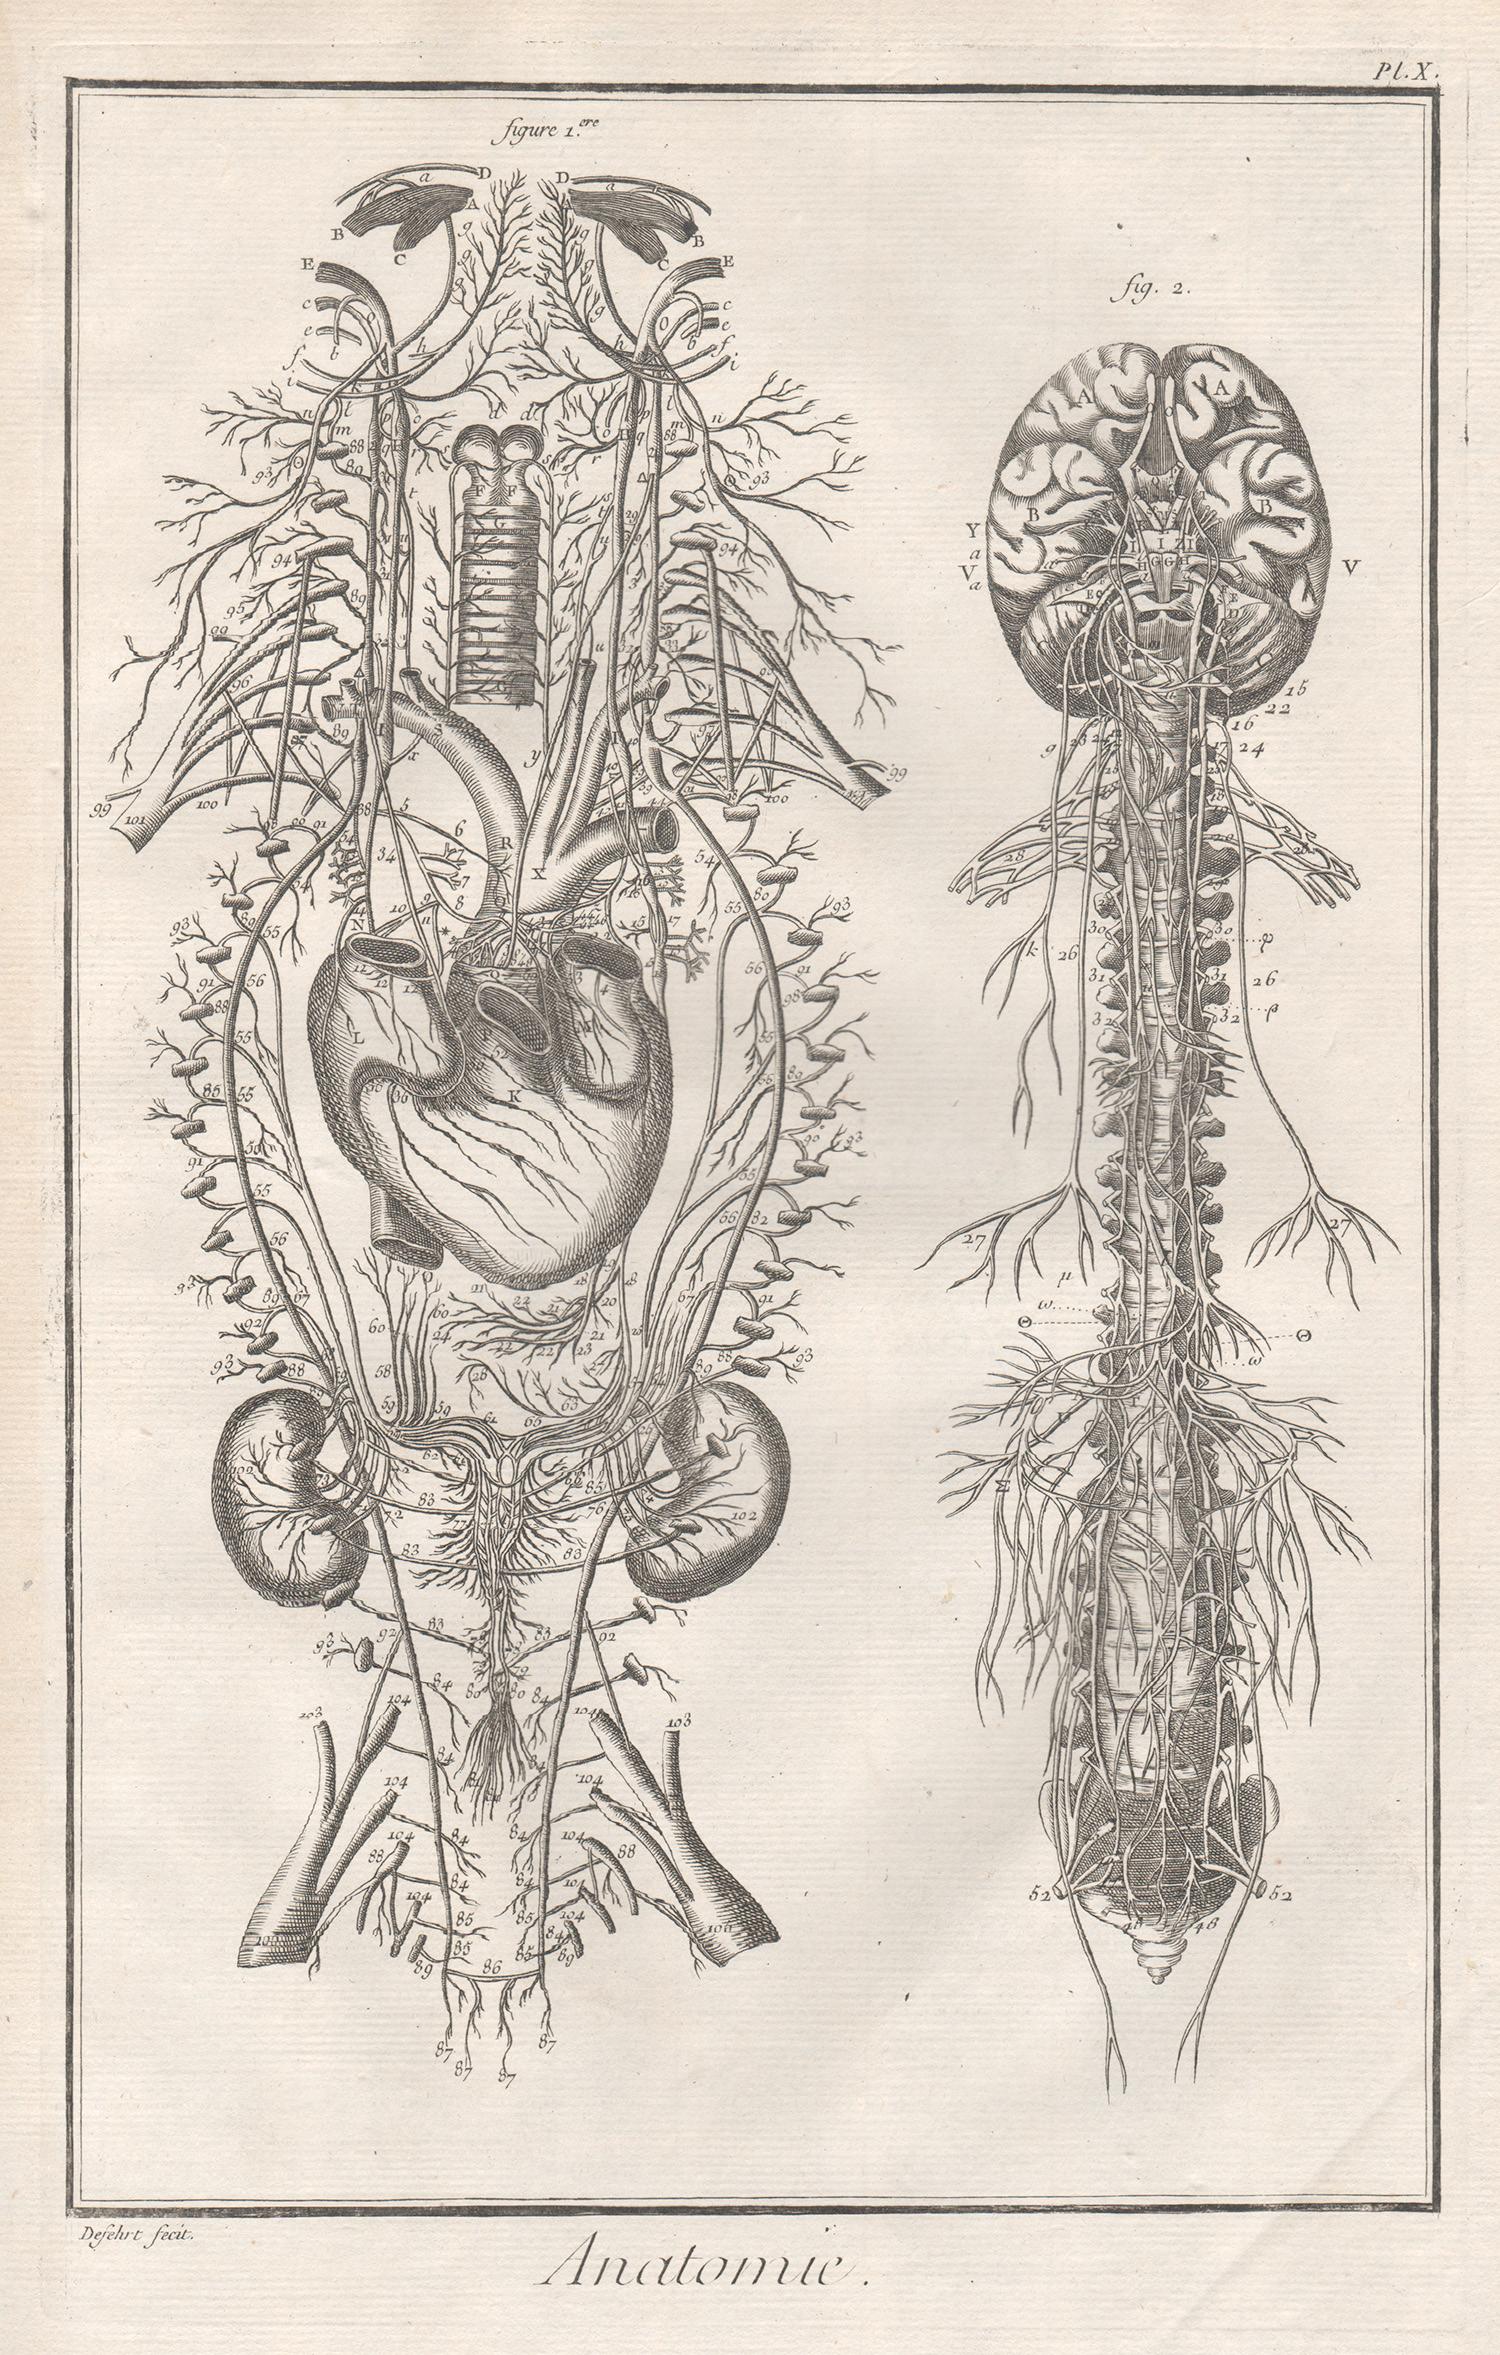 Unknown Print - 'Anatomie' - The Nervous System, French anatomy engraving, c1770